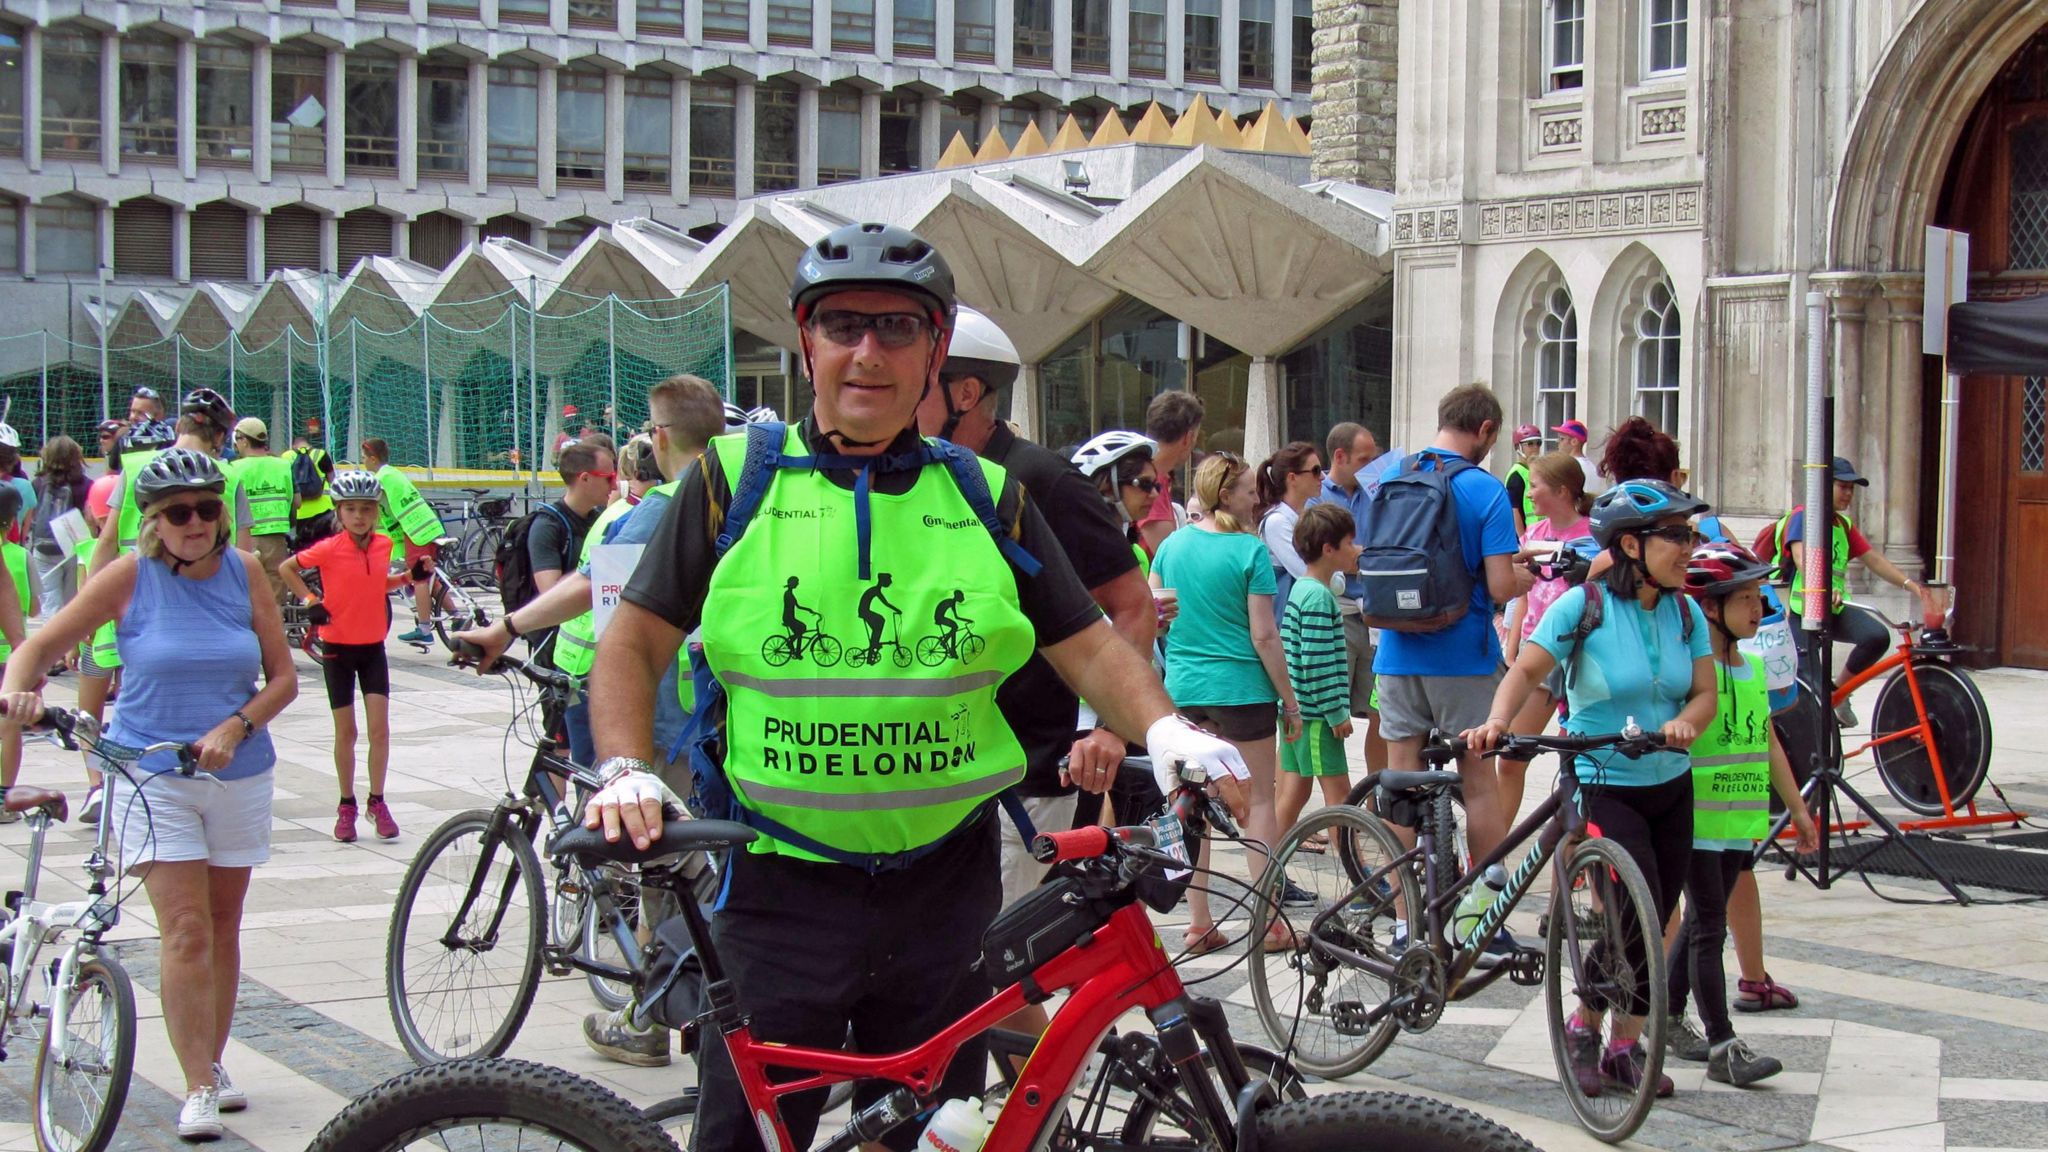 David Rose during a cycle event